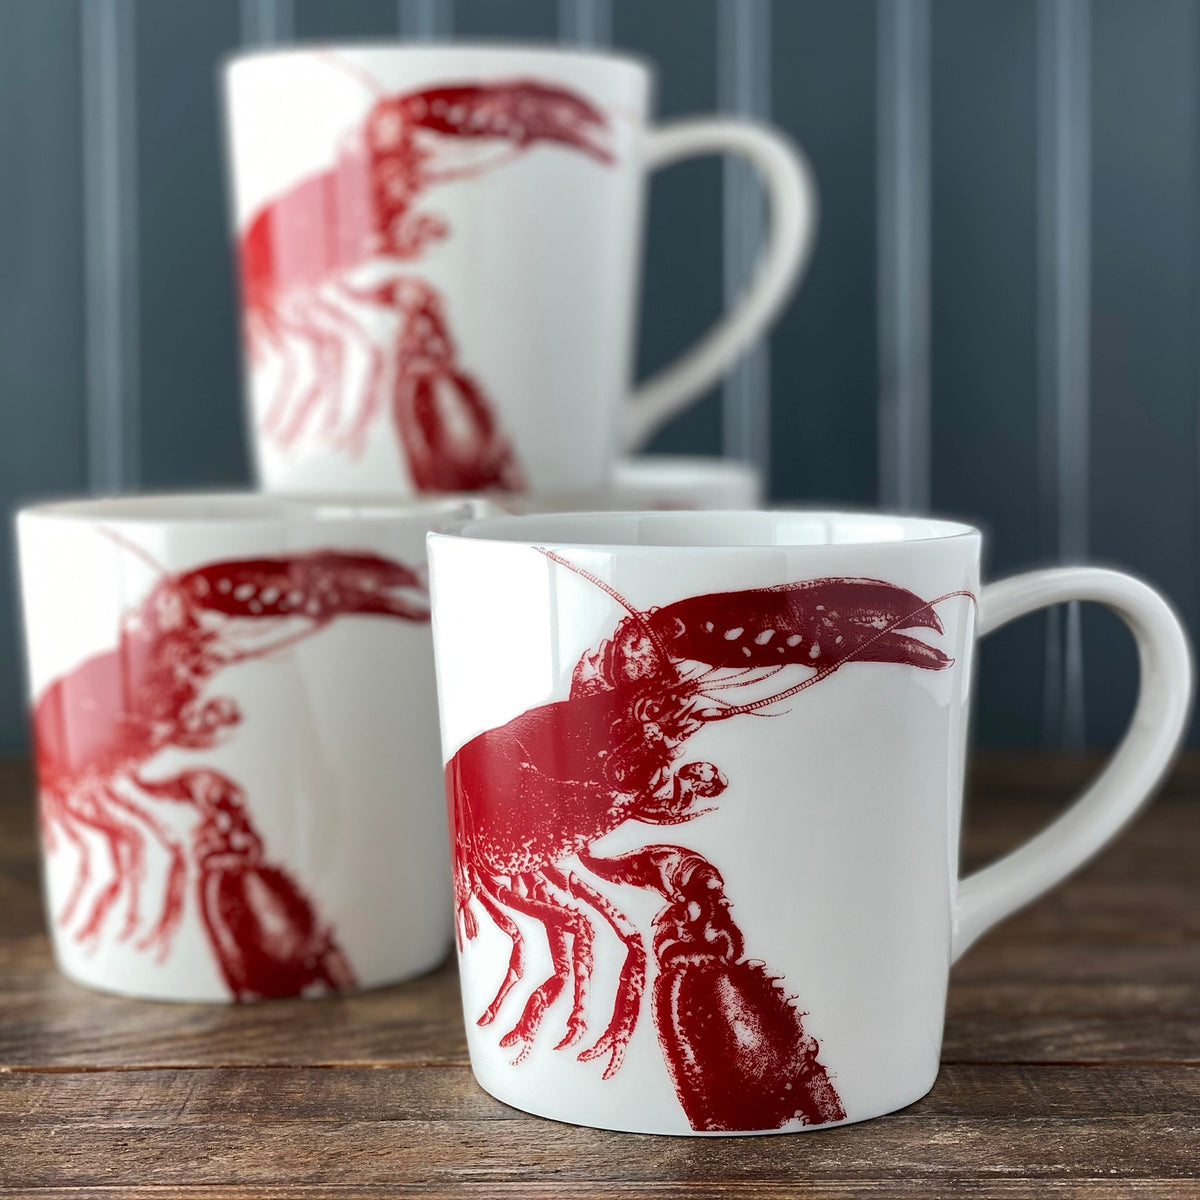 Three Caskata Artisanal Home Lobster Red Mugs featuring red lobster illustrations are stacked on a wooden surface against a vertically striped dark background, embodying a charming seaside style.